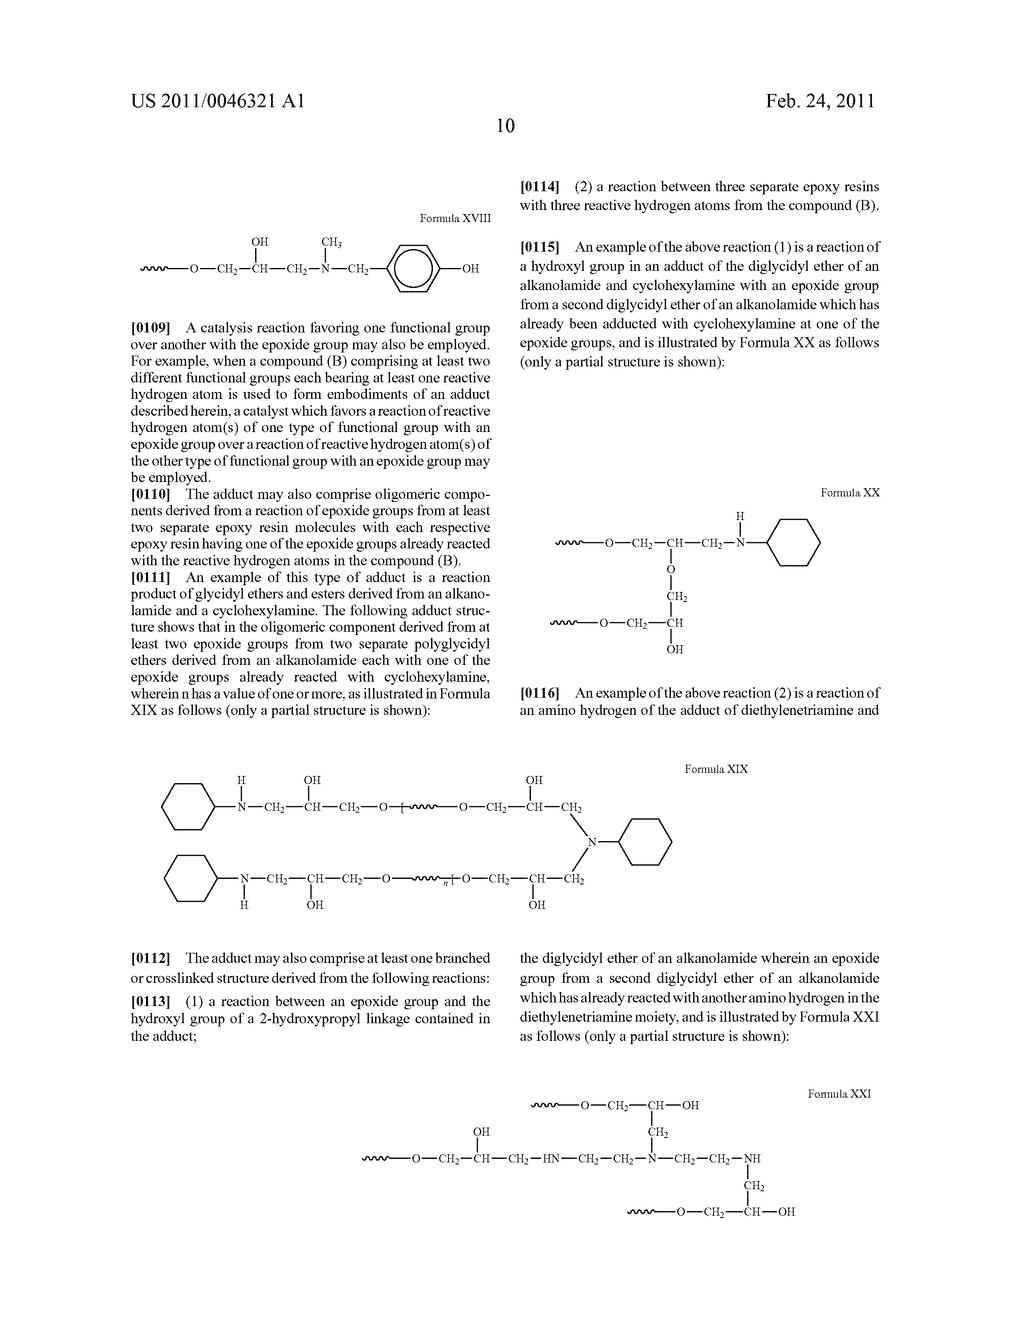 ADDUCTS OF EPOXY RESINS DERIVED FROM ALKANOLAMIDES AND A PROCESS FOR PREPARING THE SAME - diagram, schematic, and image 11